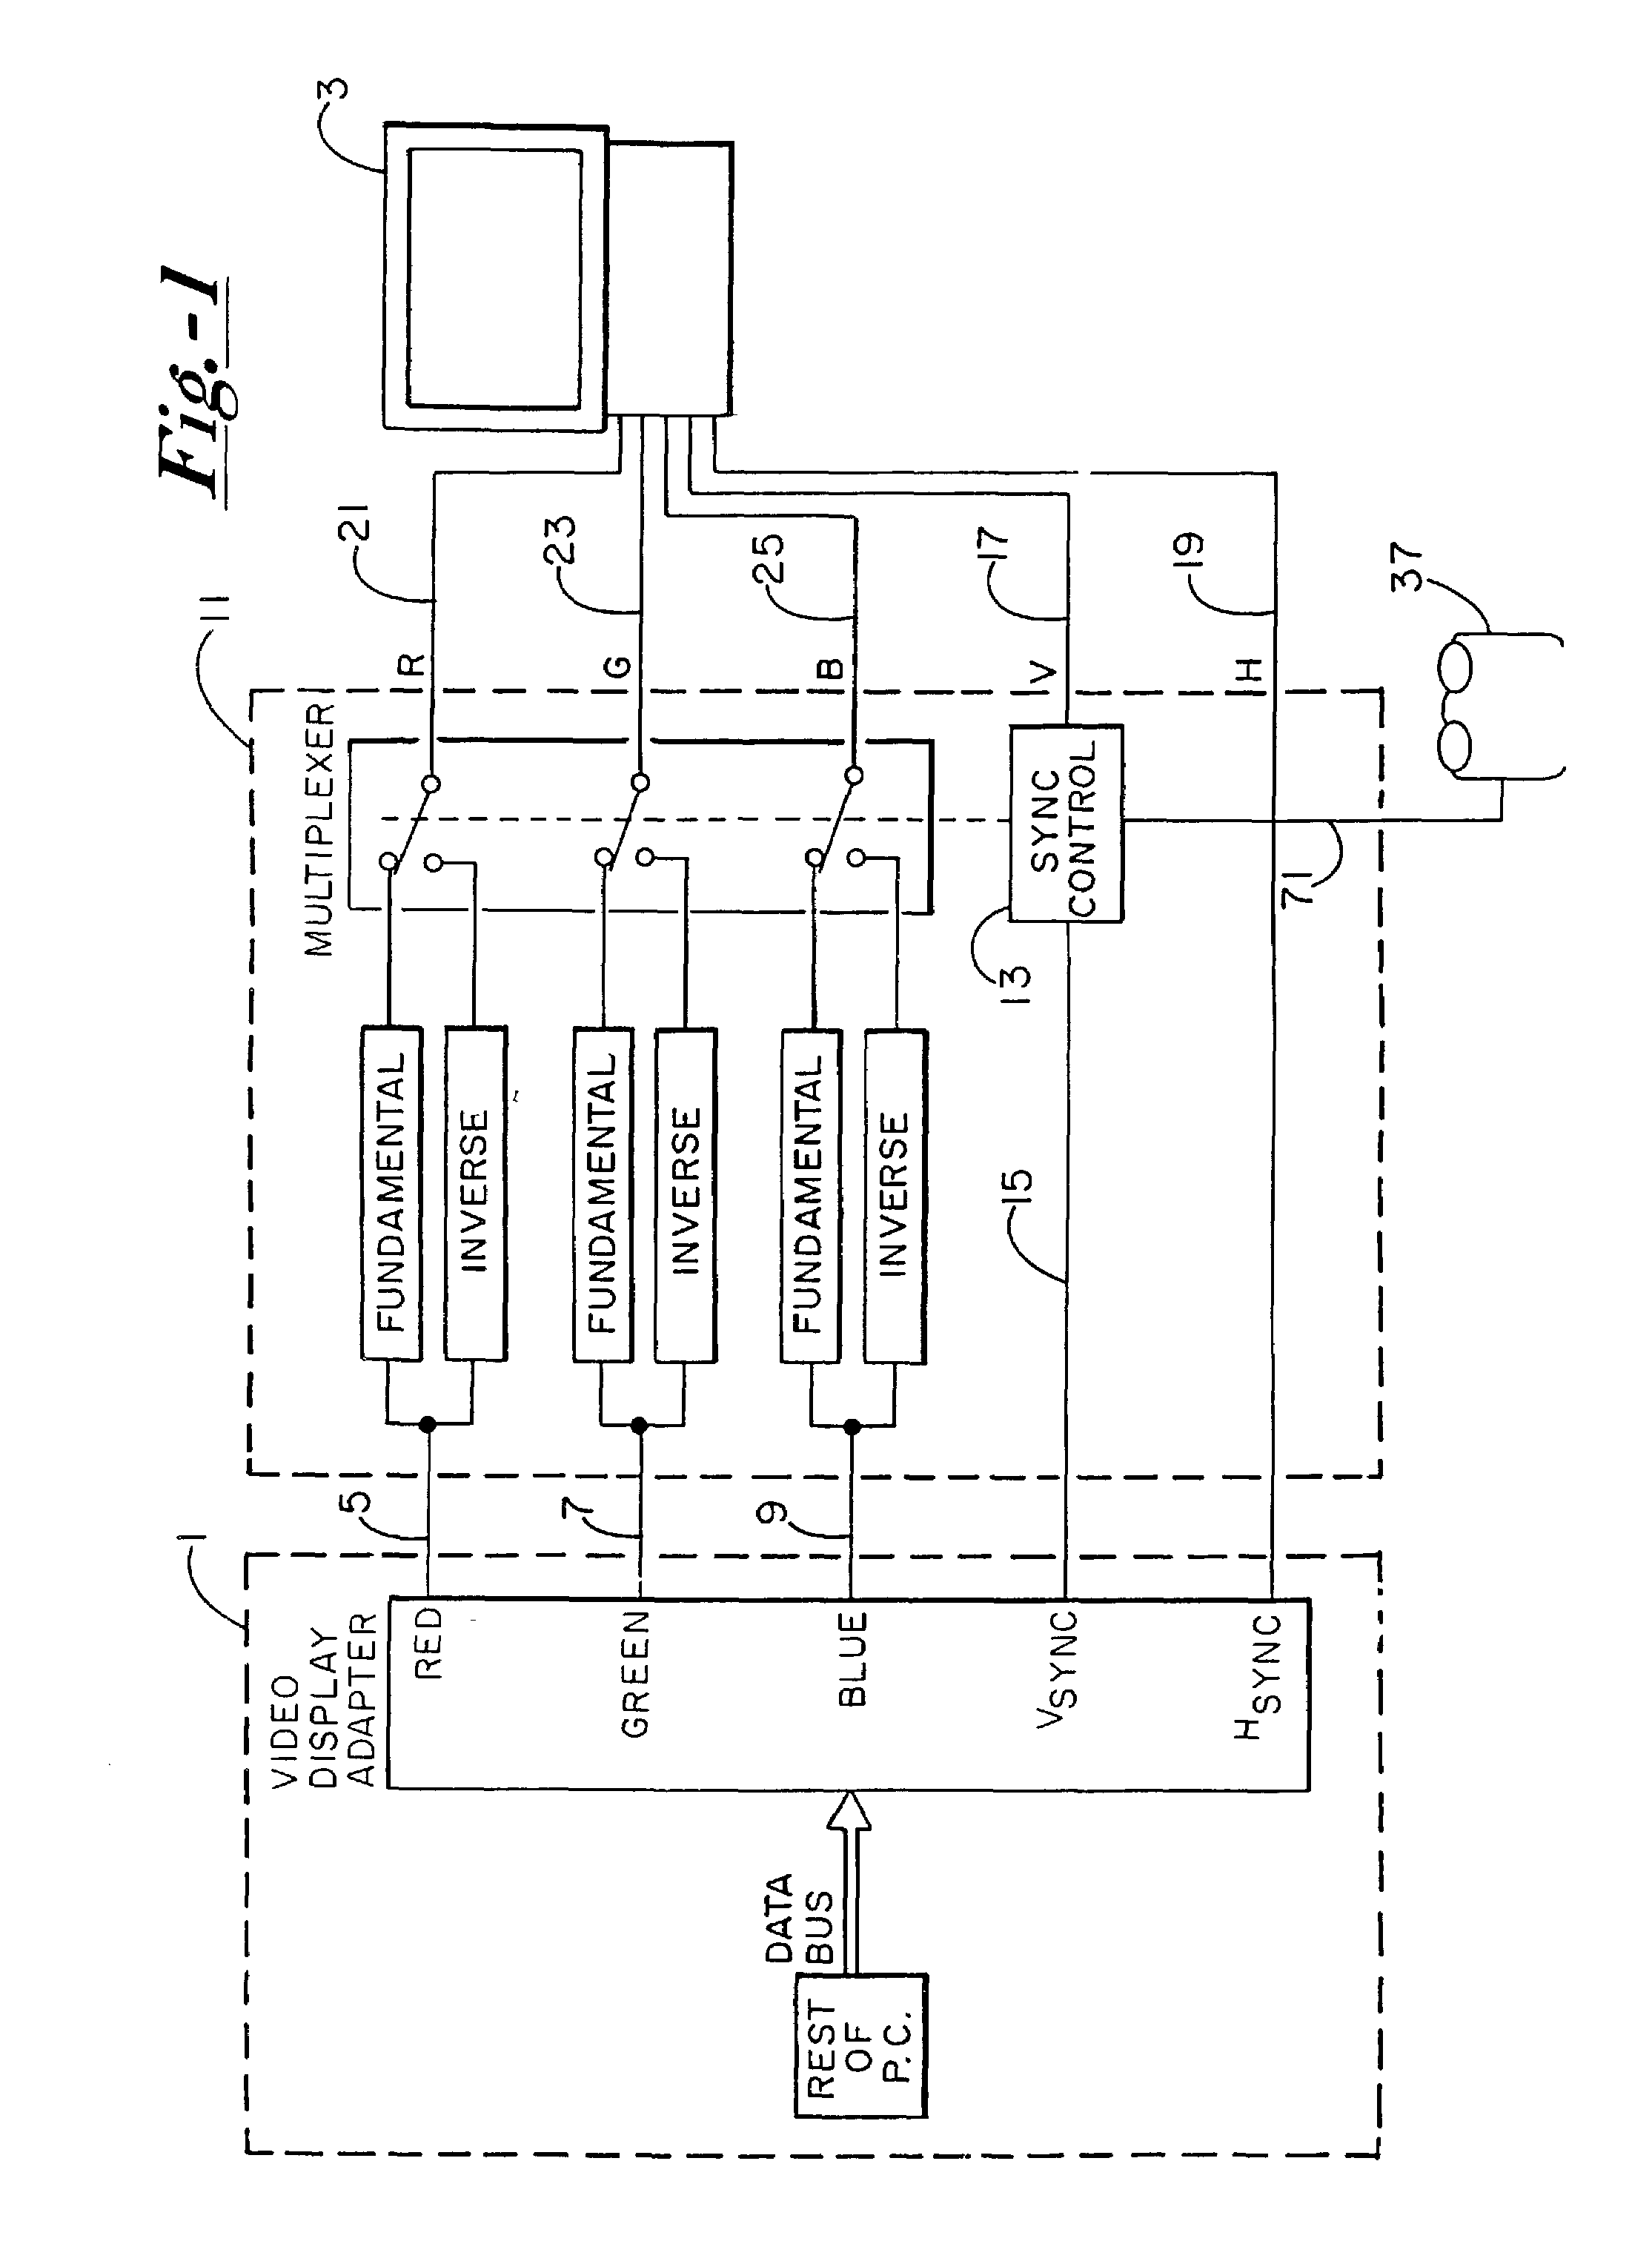 Image altering apparatus and method for providing confidential viewing of a fundamental display image